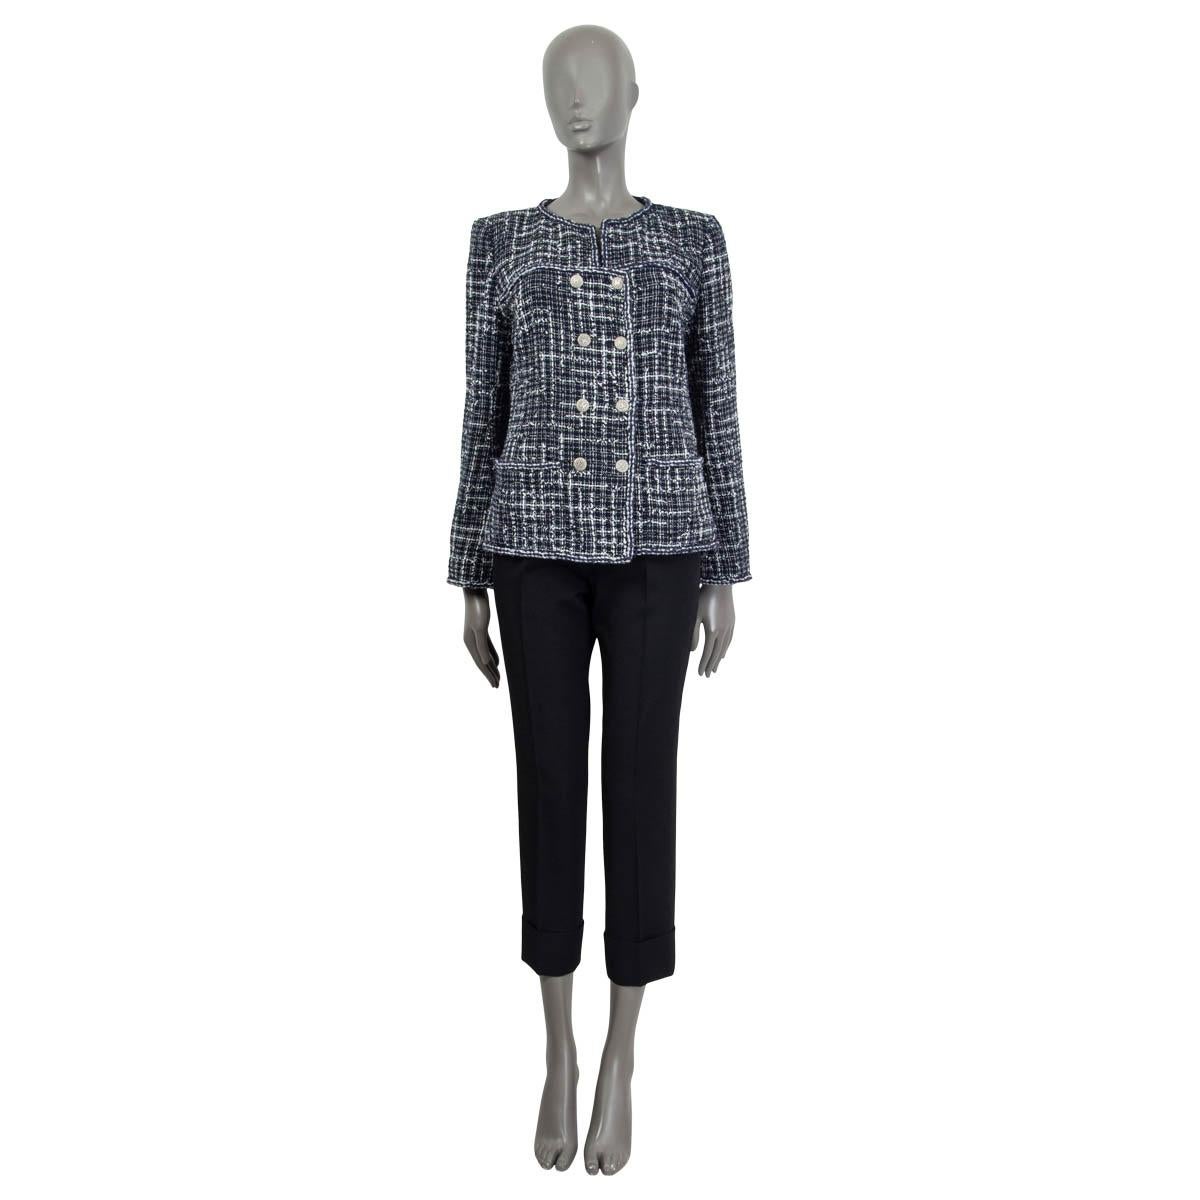 100% authentic Chanel 2014 double-breasted tweed jacket in midnight blue and white cotton (60%), nylon (20%), acrylic (14%) and polyester (6%). Features two slit pockets on the front and buttoned cuffs. Opens with five buttons on the front. Lined in